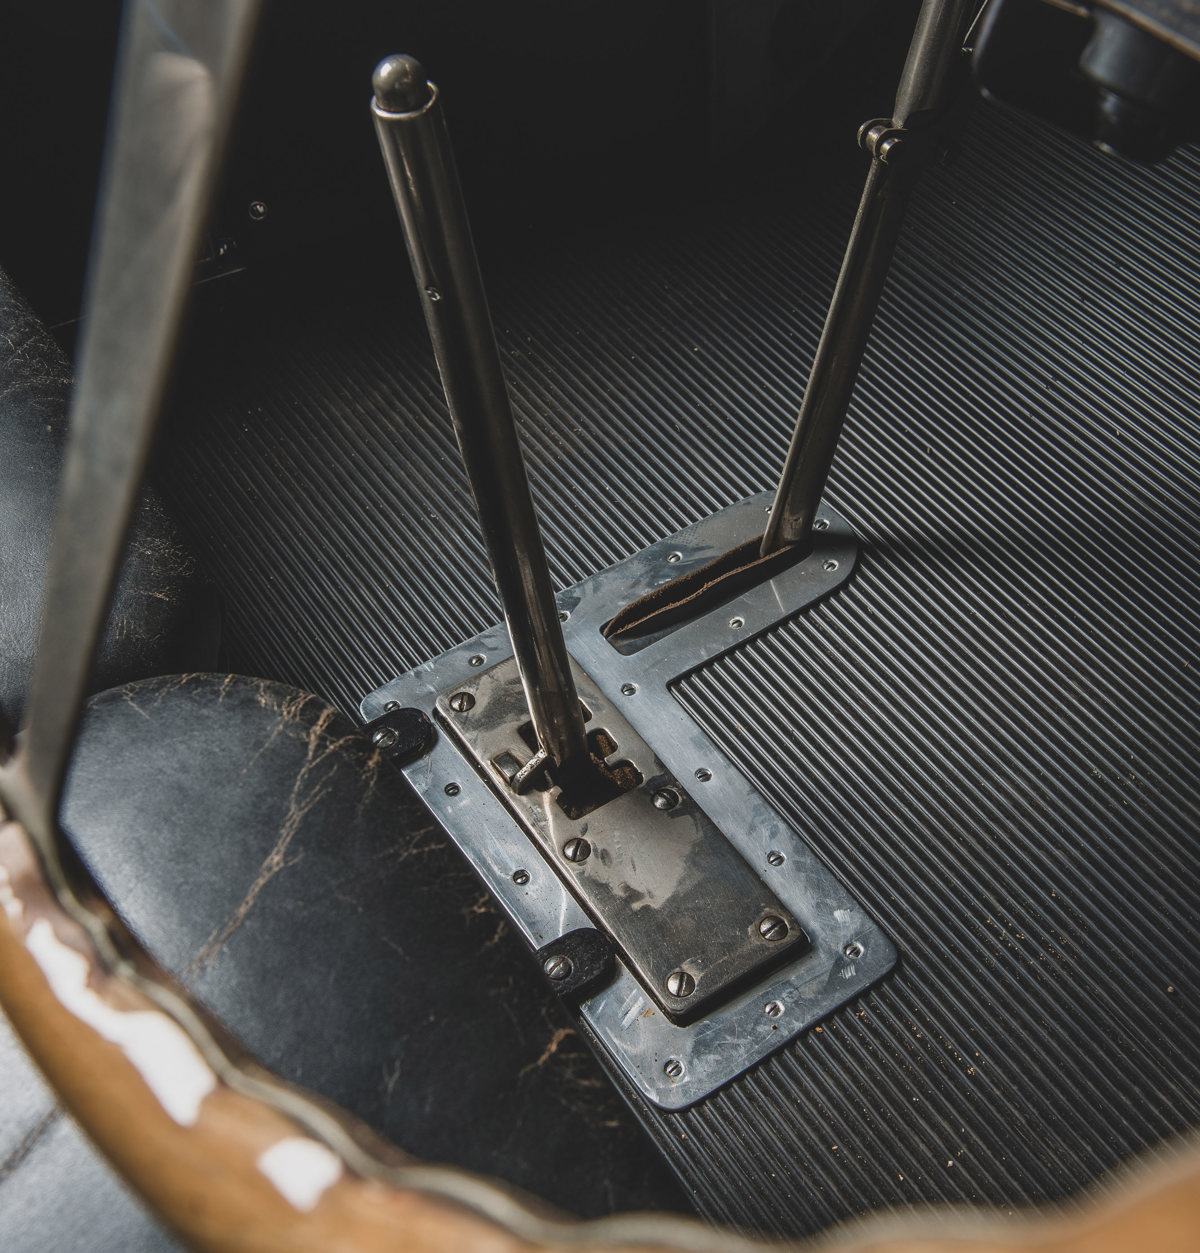 Gear shift of 1927 Bugatti Type 40 Grand Sport offered at RM Sotheby’s The Guyton Collection live auction 2019